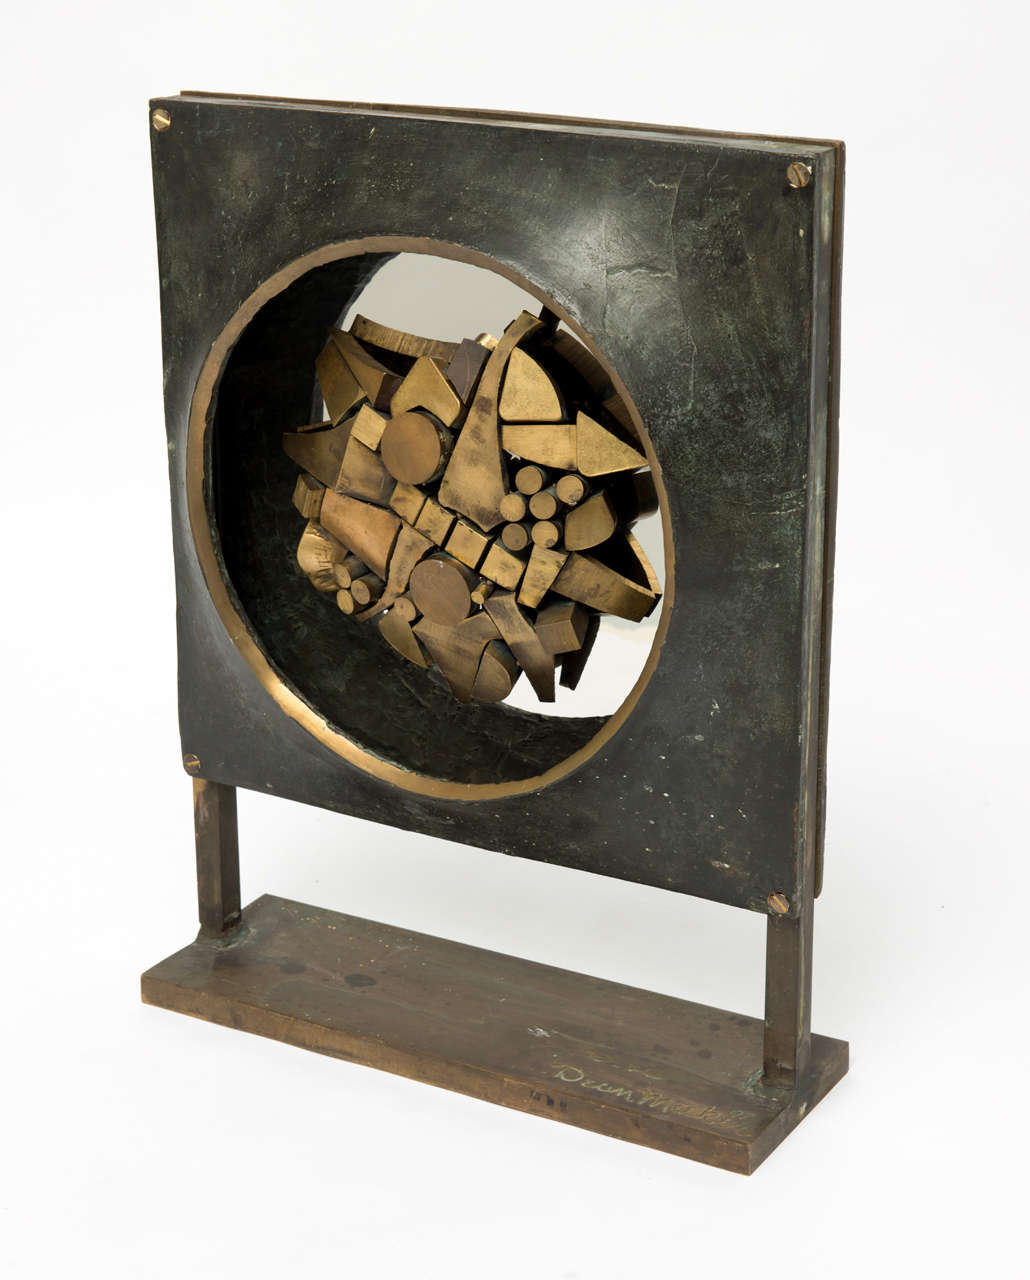 A fantastic unique  Bronze sculpture by Dean Meeker. It  is 2 sided,  one side has the darker surround and brighter center elements and the other side has the lighter surround and the darker center elements. The abstract pattern in the center is